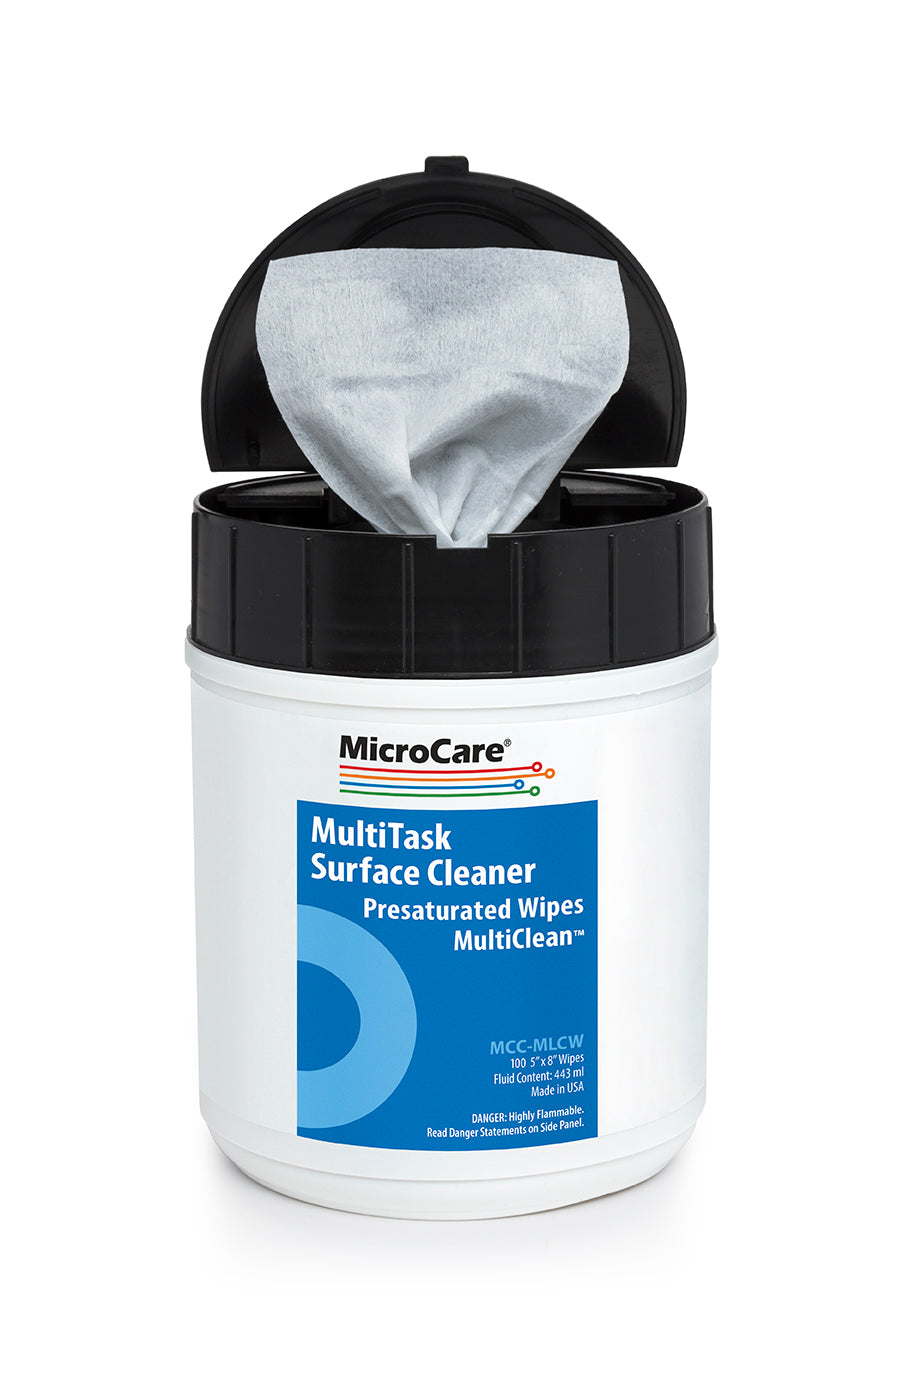 Micro Care MCC-MLCW 70% Isopropyl Alcohol Disinfecting Wipes with MultiClean, Tub of 100 Wipes